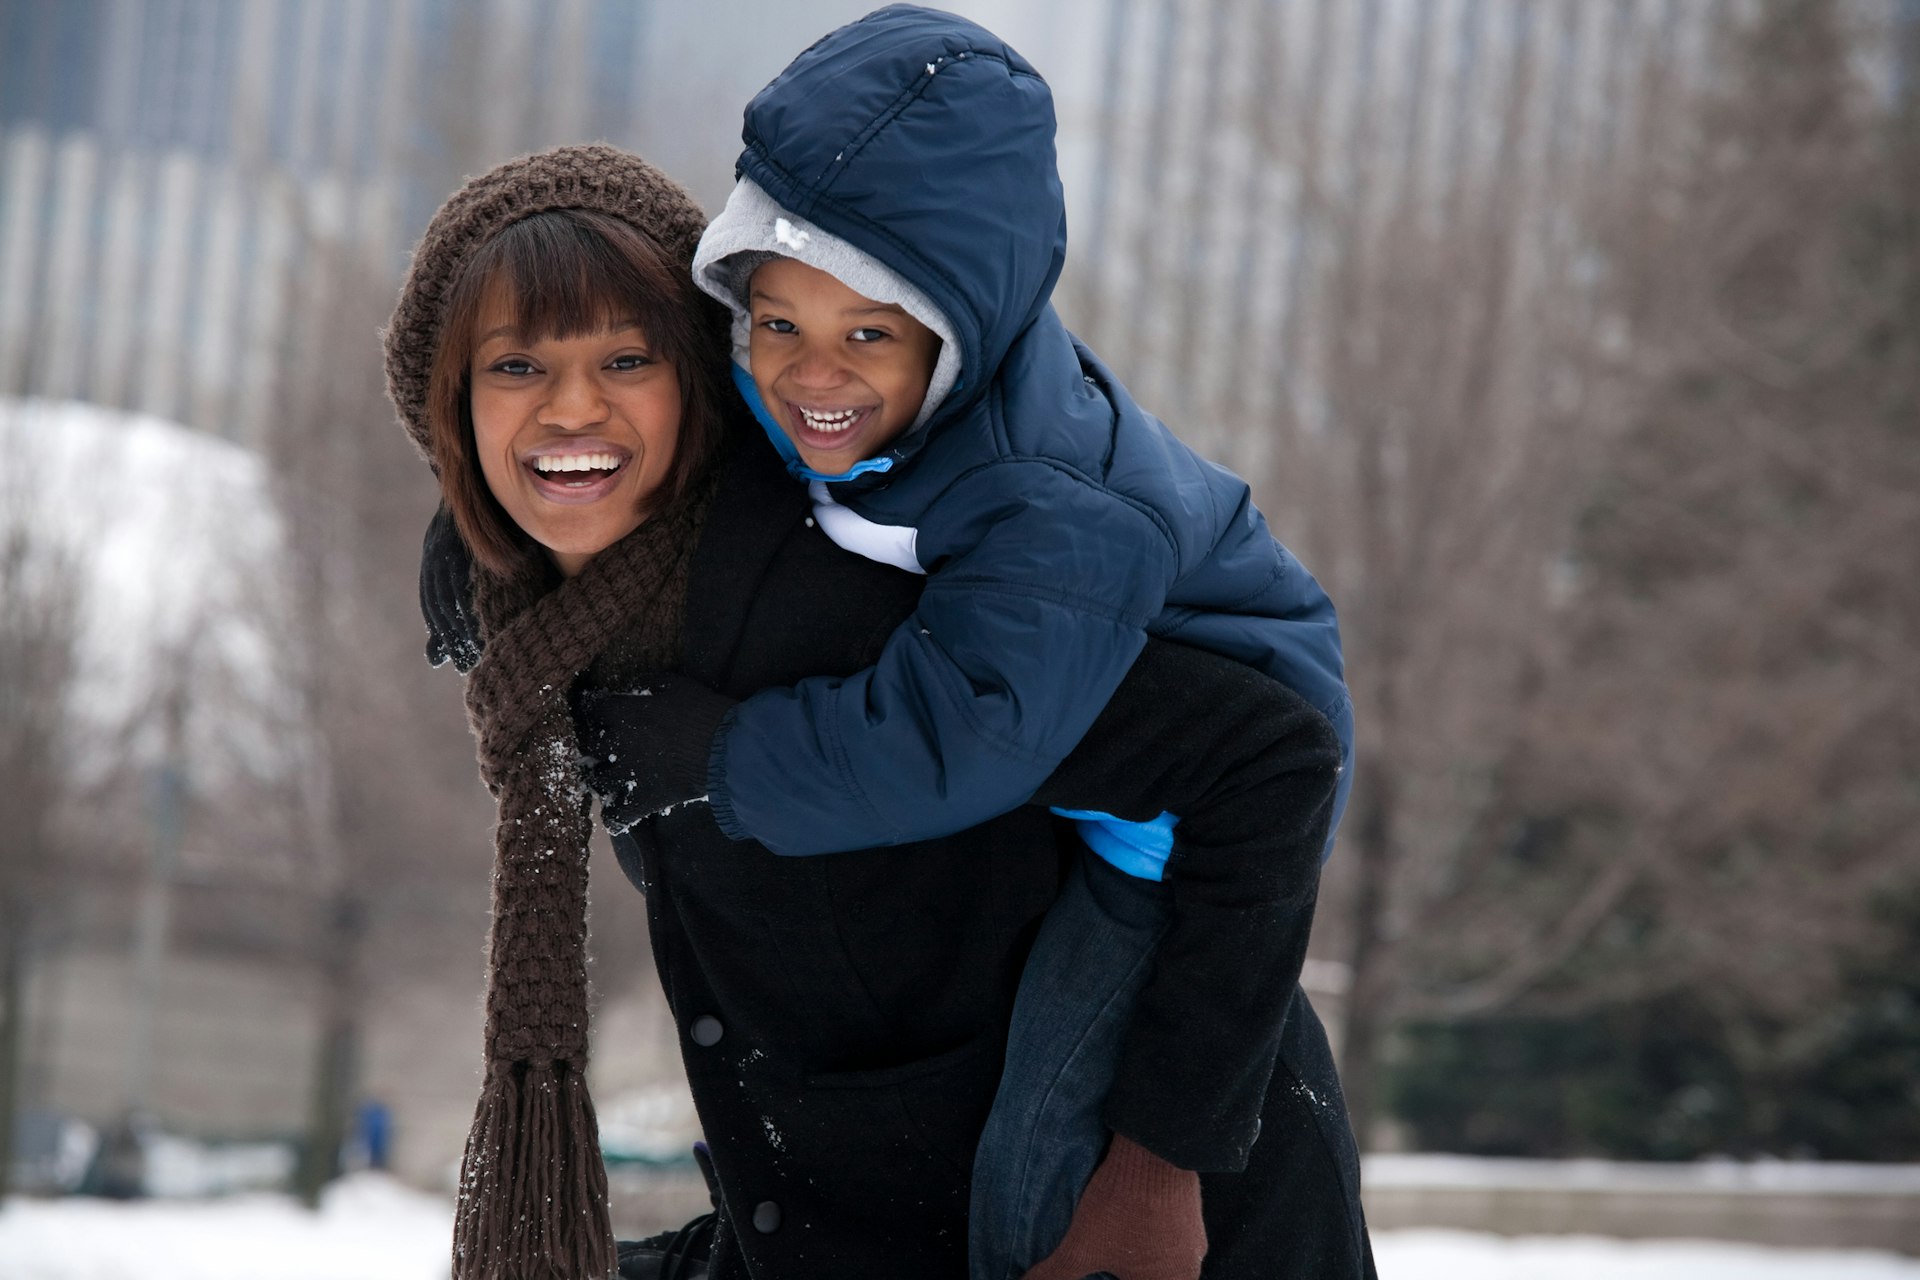 Mother and son having fun in Chicago during the winter.